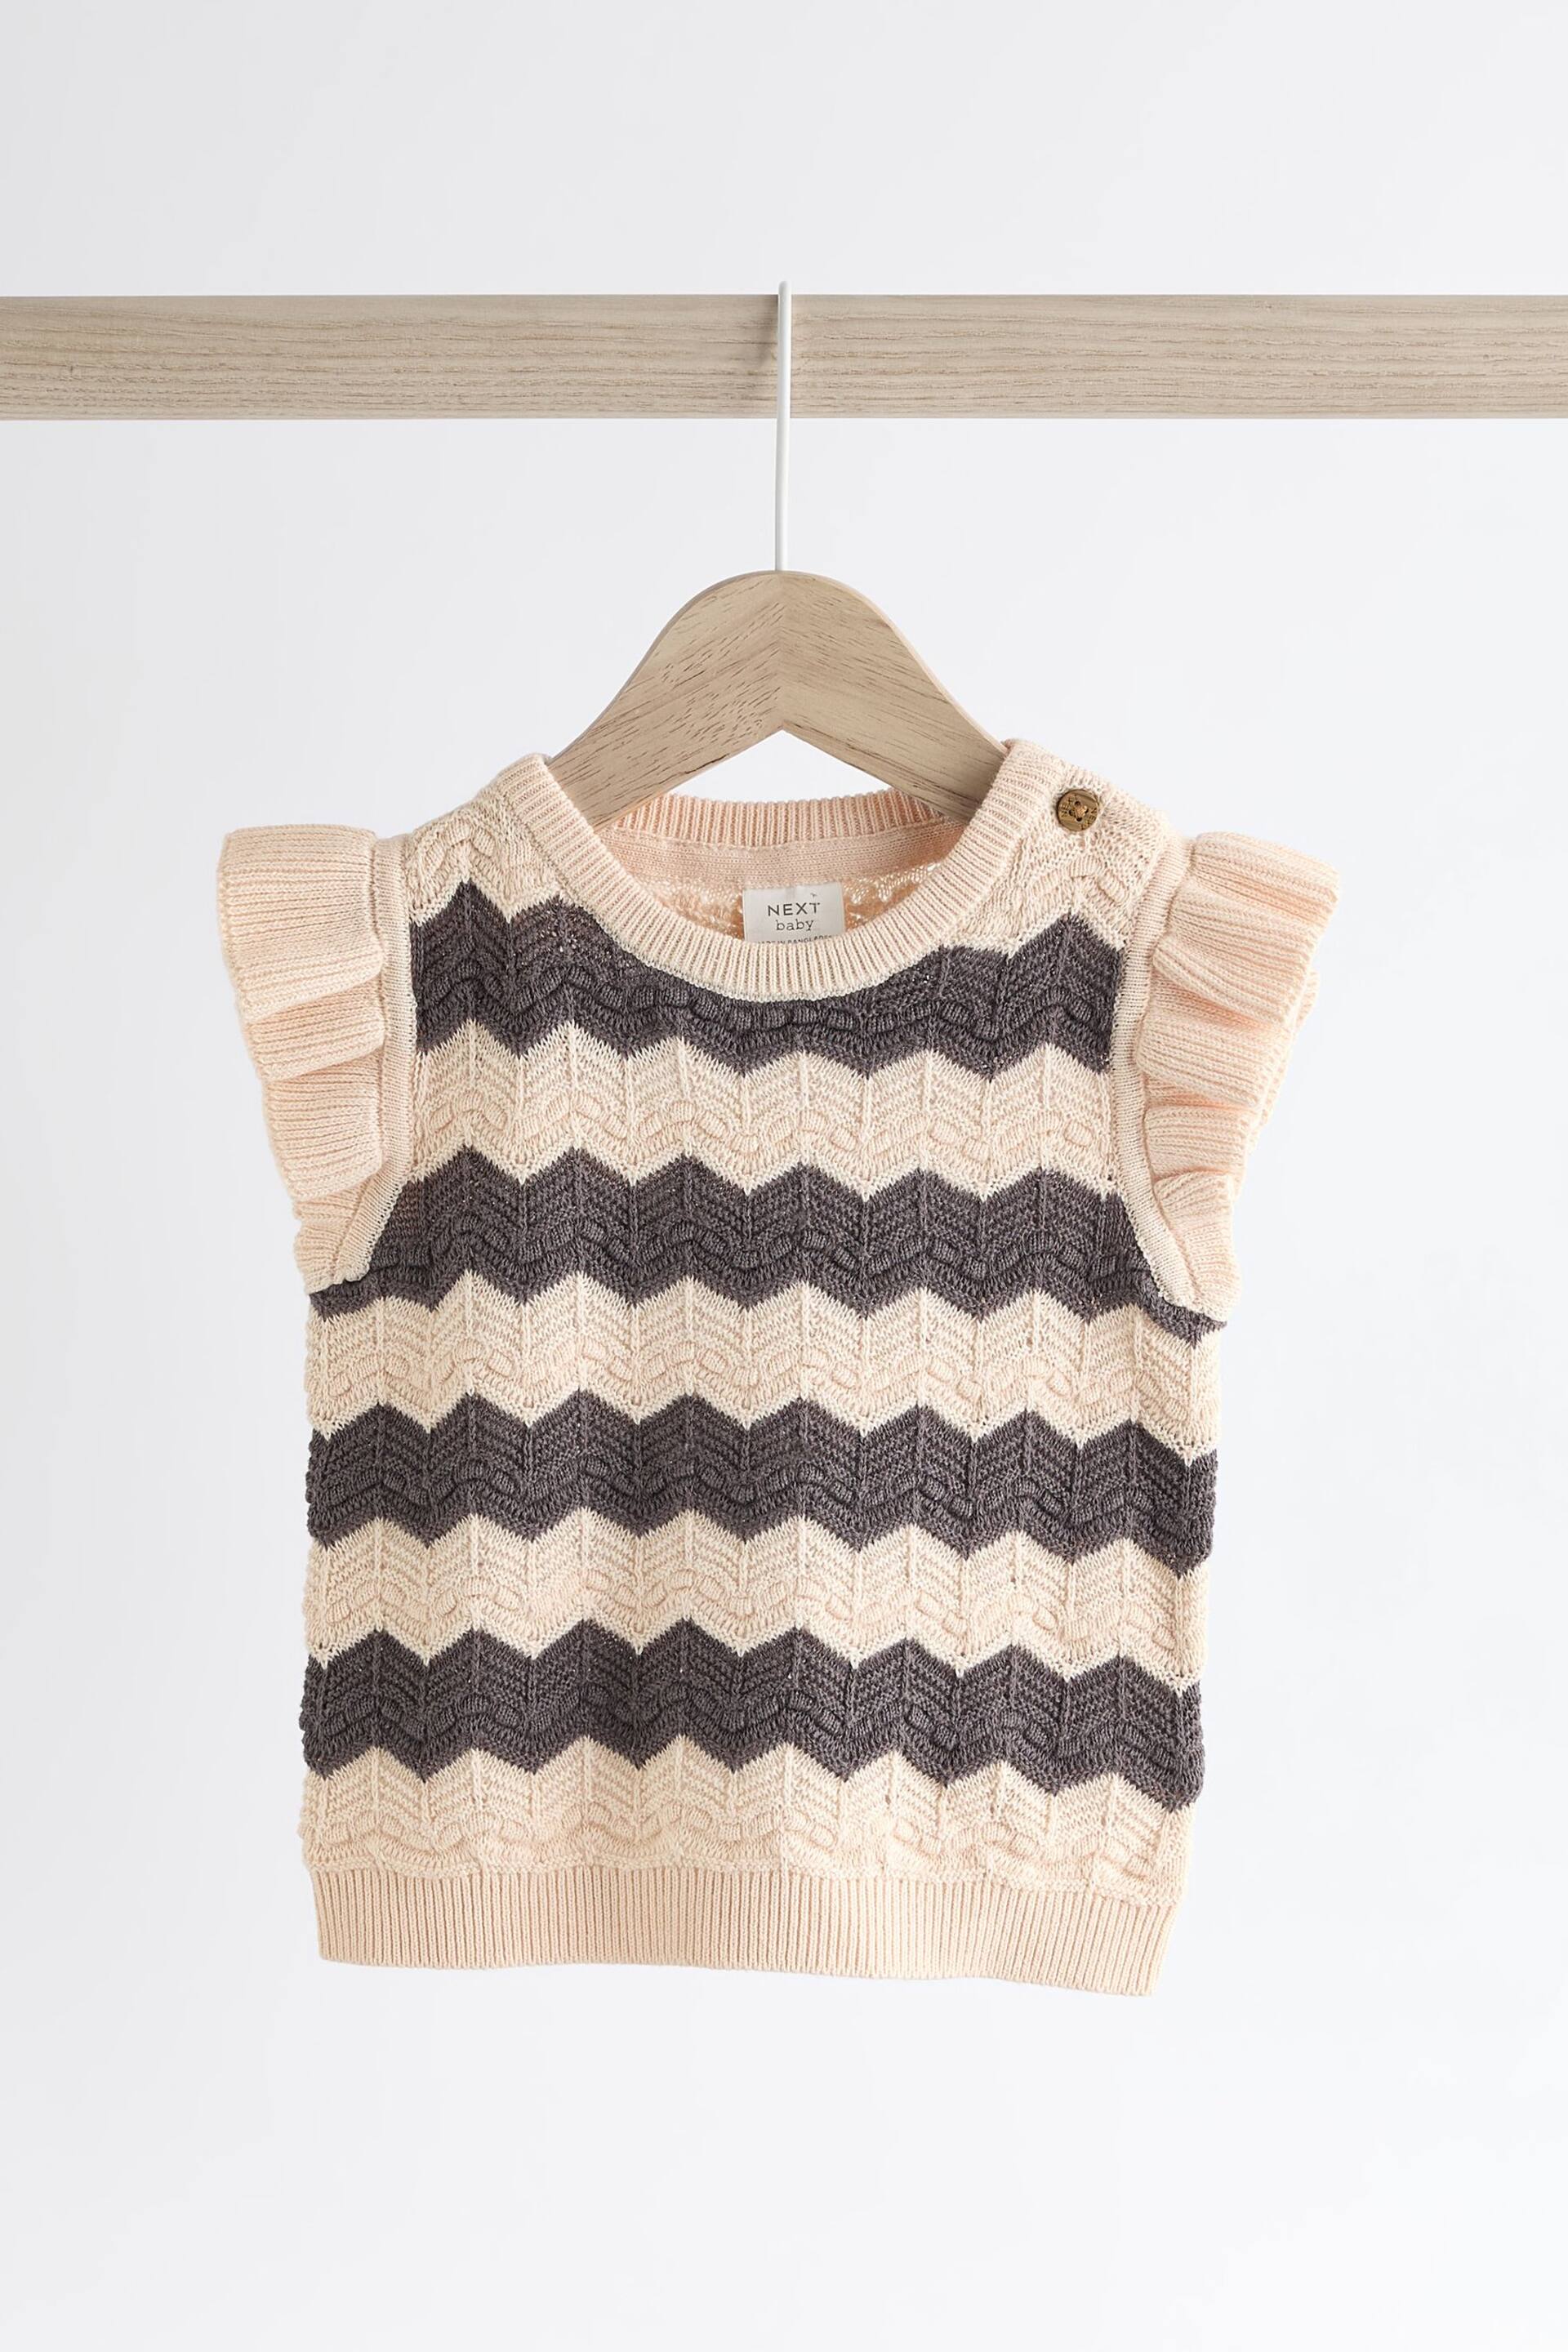 Tan/ Monochrome Zig Zag Stripe Baby Knitted Crochet Top And Shorts Set (0mths-2yrs) - Image 3 of 9